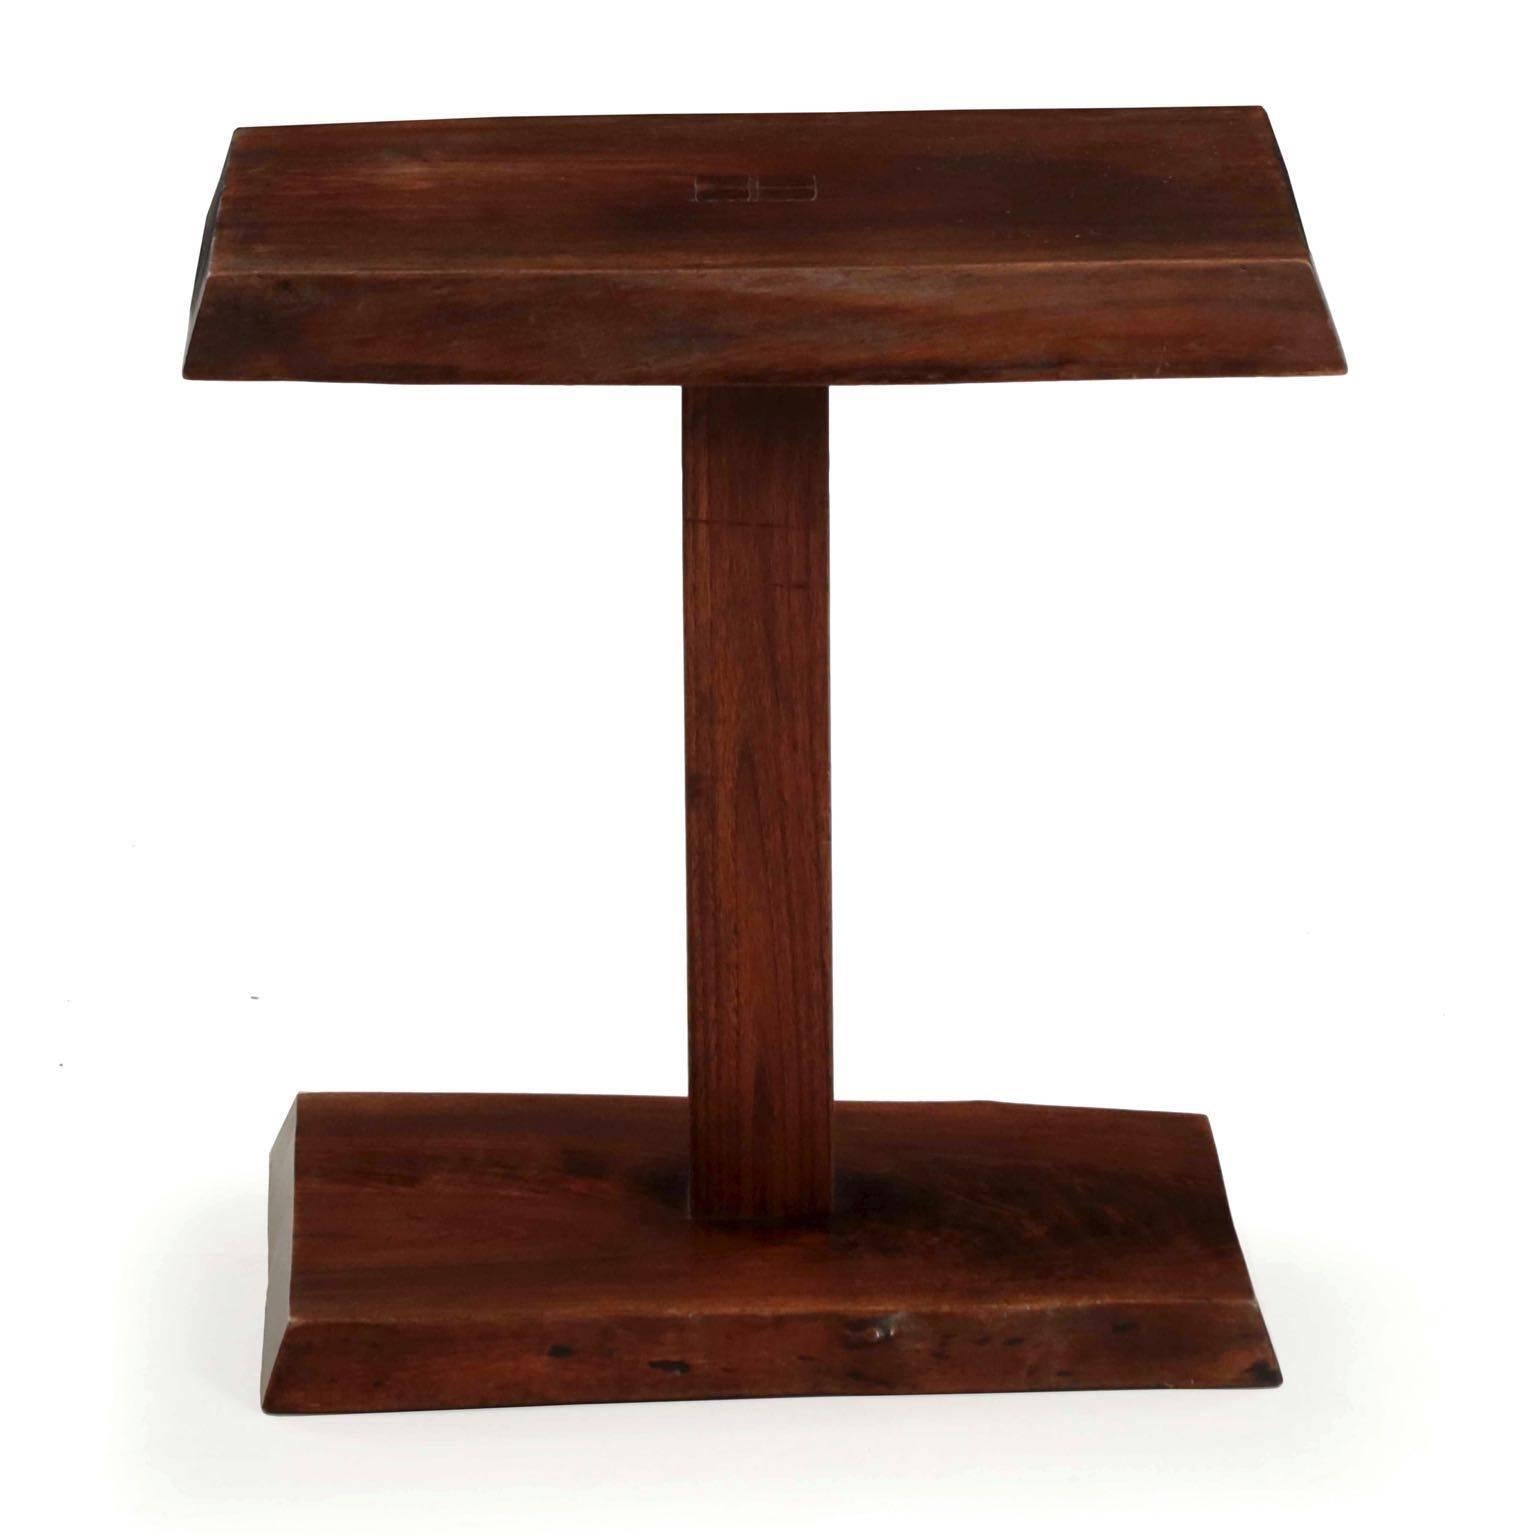 A striking modernism piece from the 1970s by notable woodworker Alan Rockwell of New Hope, Pennsylvania, the table is signed by chisel to the underside in a rough blocked script. A contemporary of Phillip Lloyd Powell and George Nakashima with a